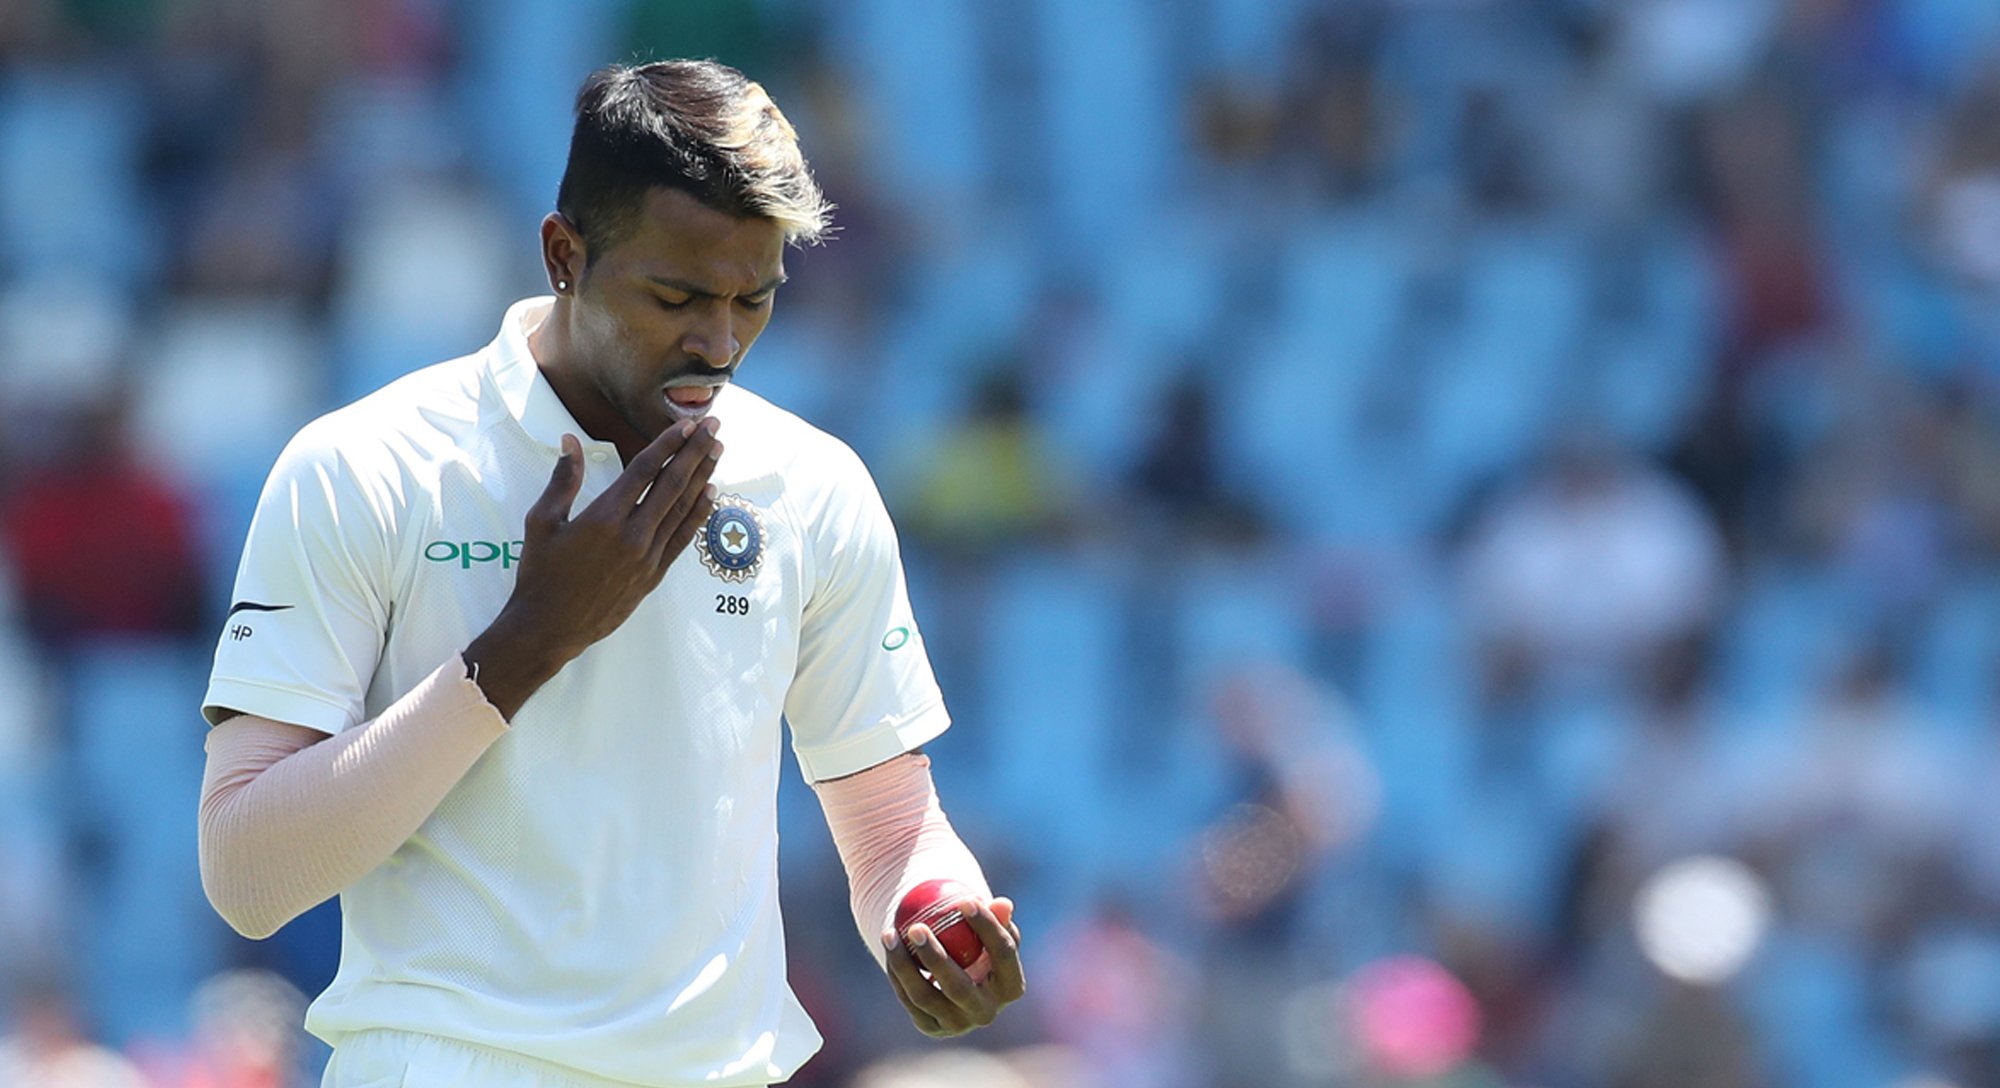 pandya s misogynist comments on women spark anger